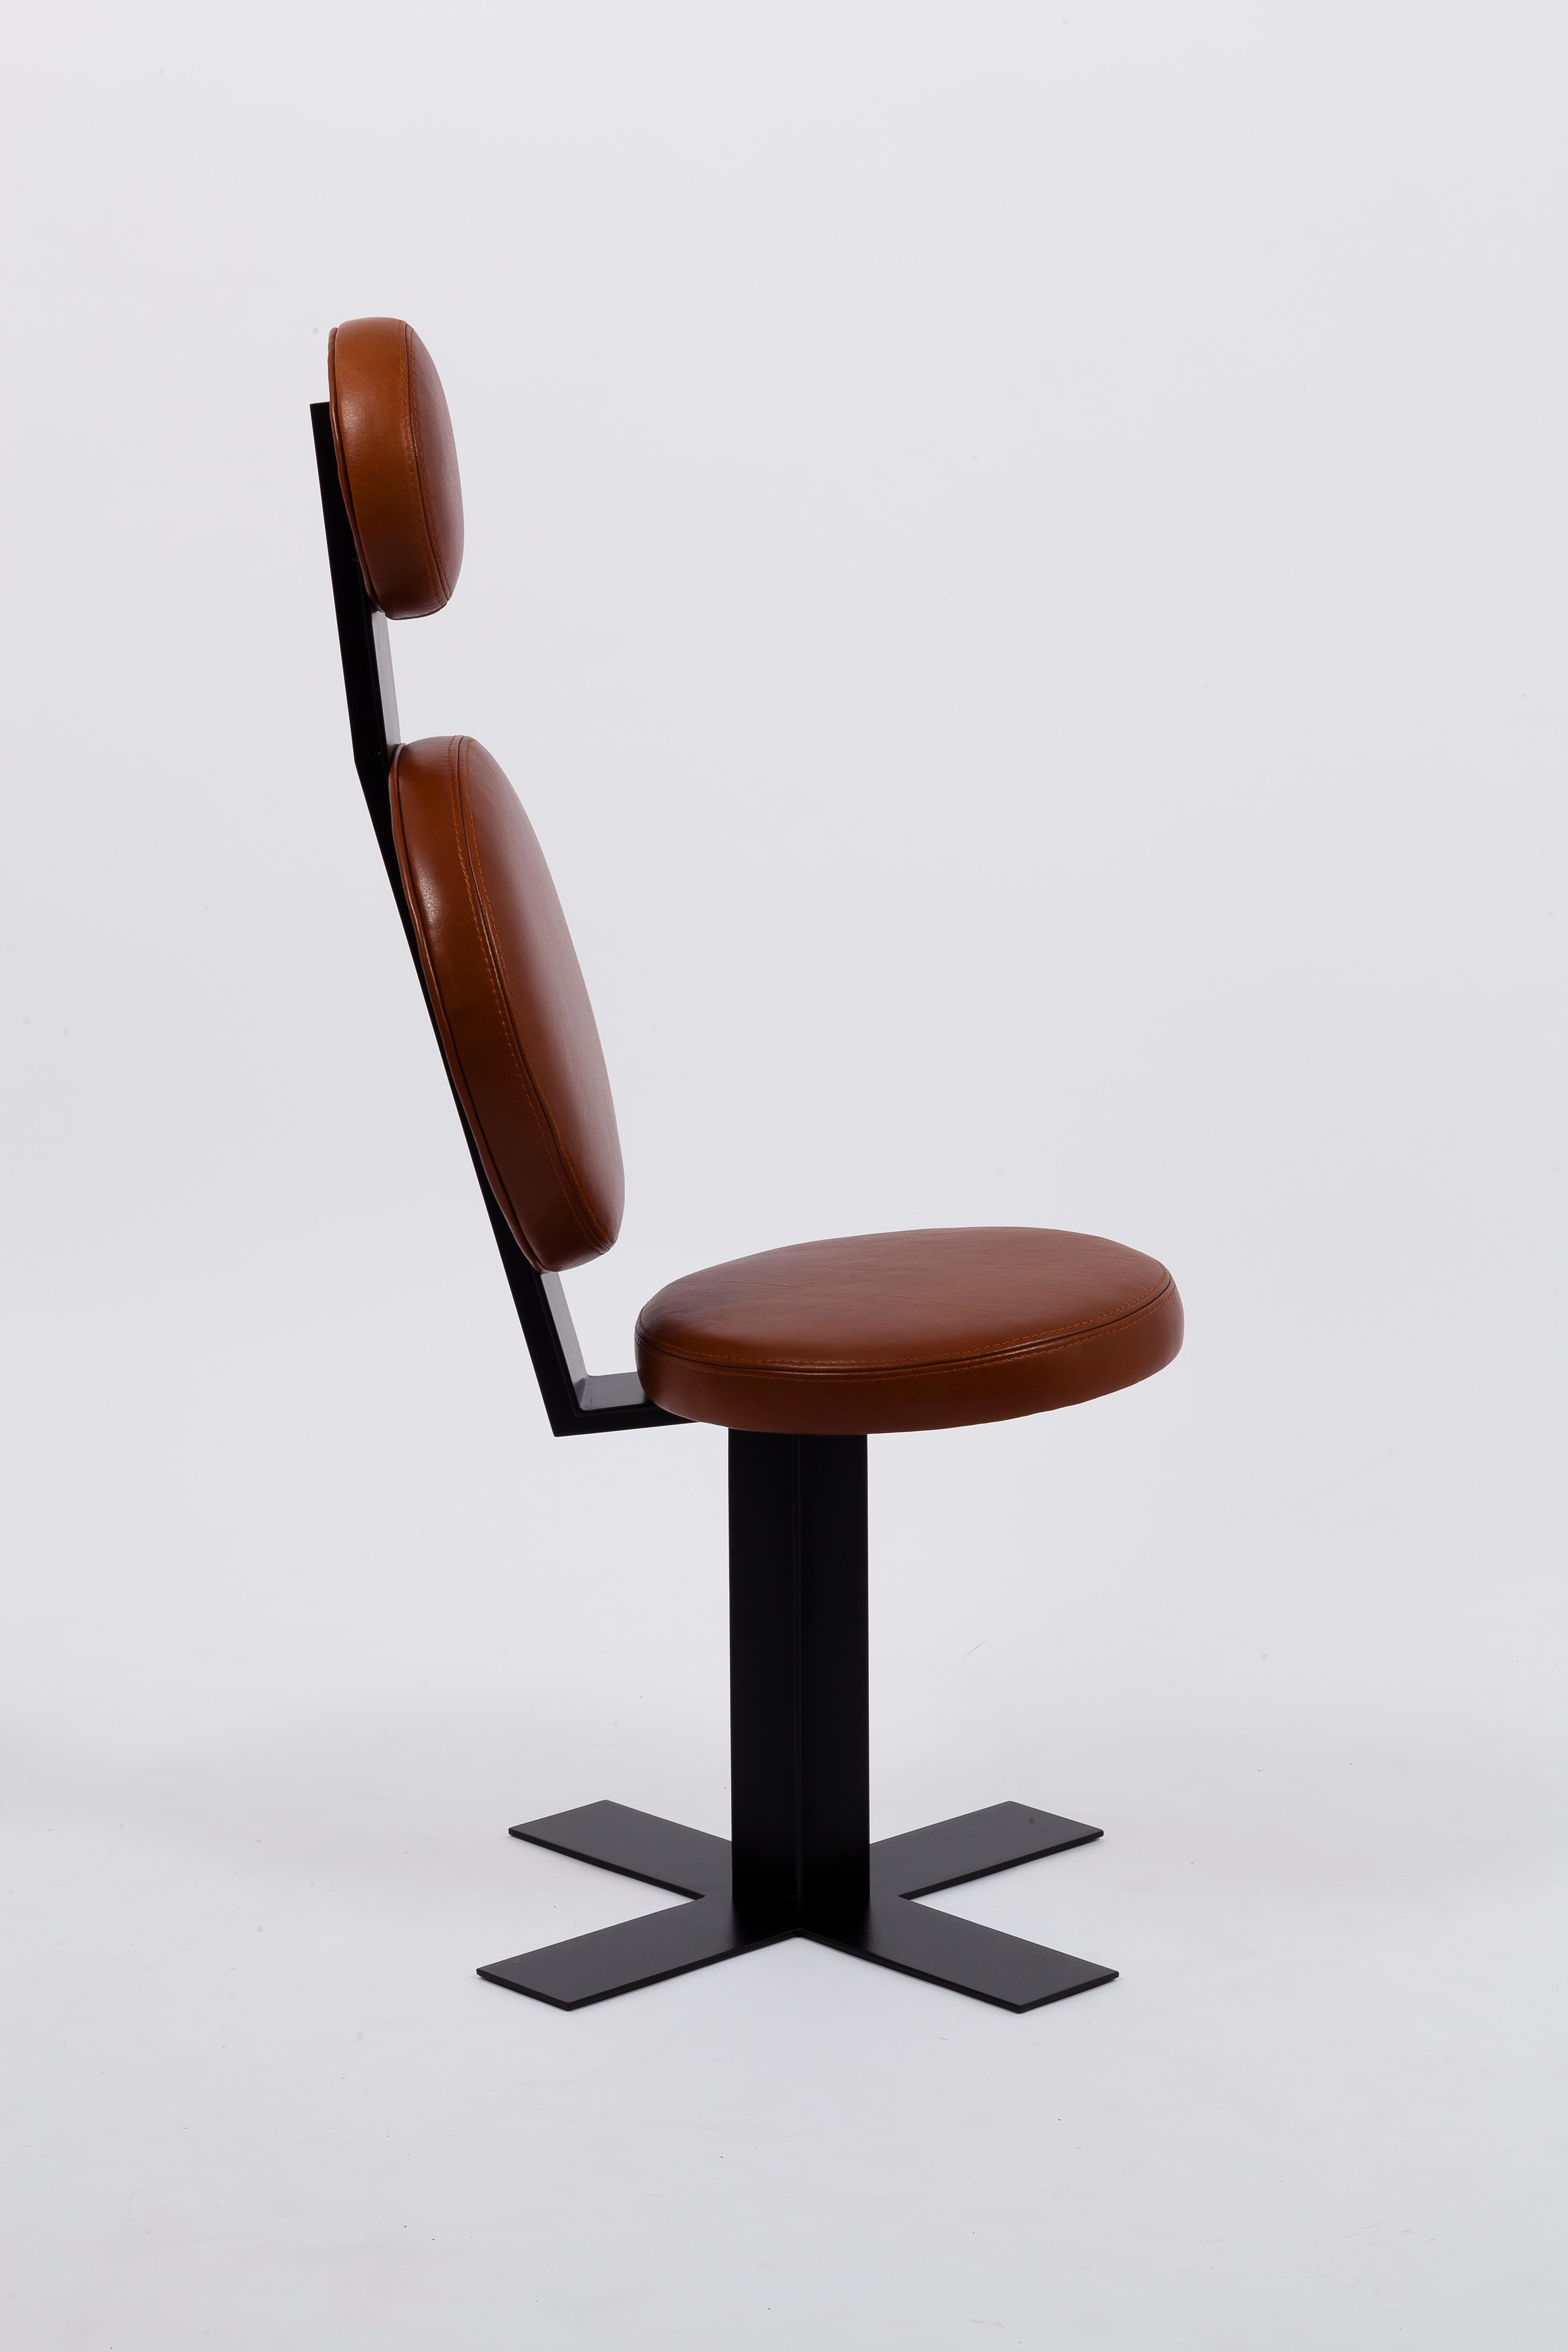 Romanian Leather and Steel Mid-Century Modern Designer Office Chair For Sale